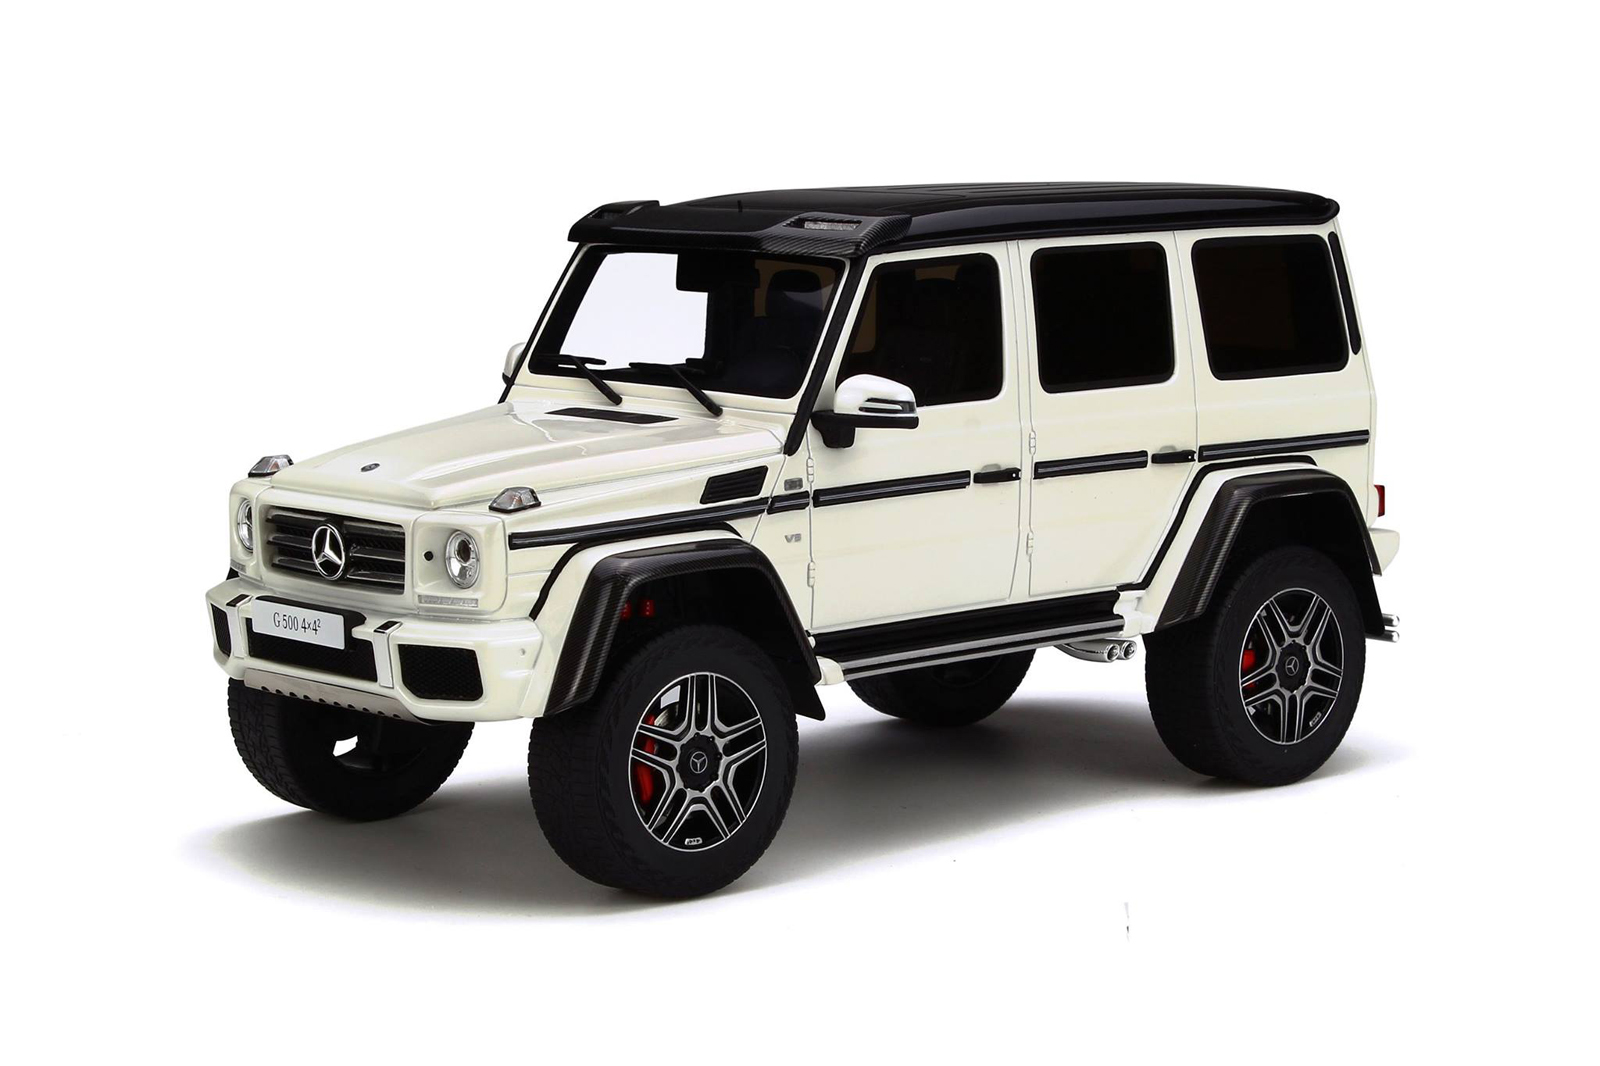 GT Spirit to Release 1:18 Mercedes Benz G500 4×4 Squared by this 